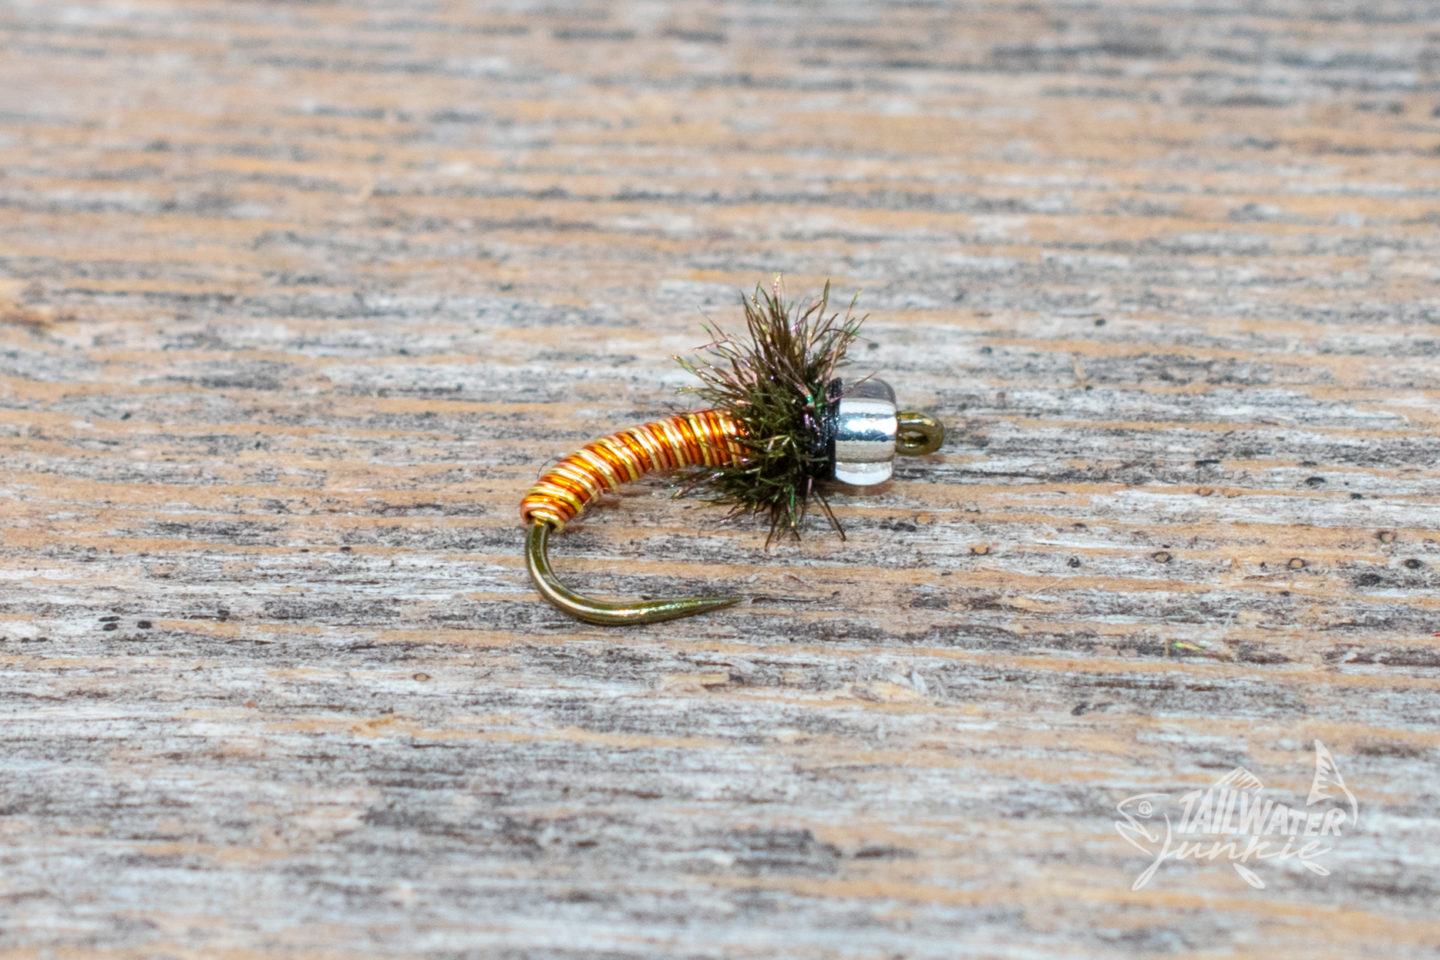 The Mercury Brassie as an excellent attractor in a multi-fly nymphing rig.